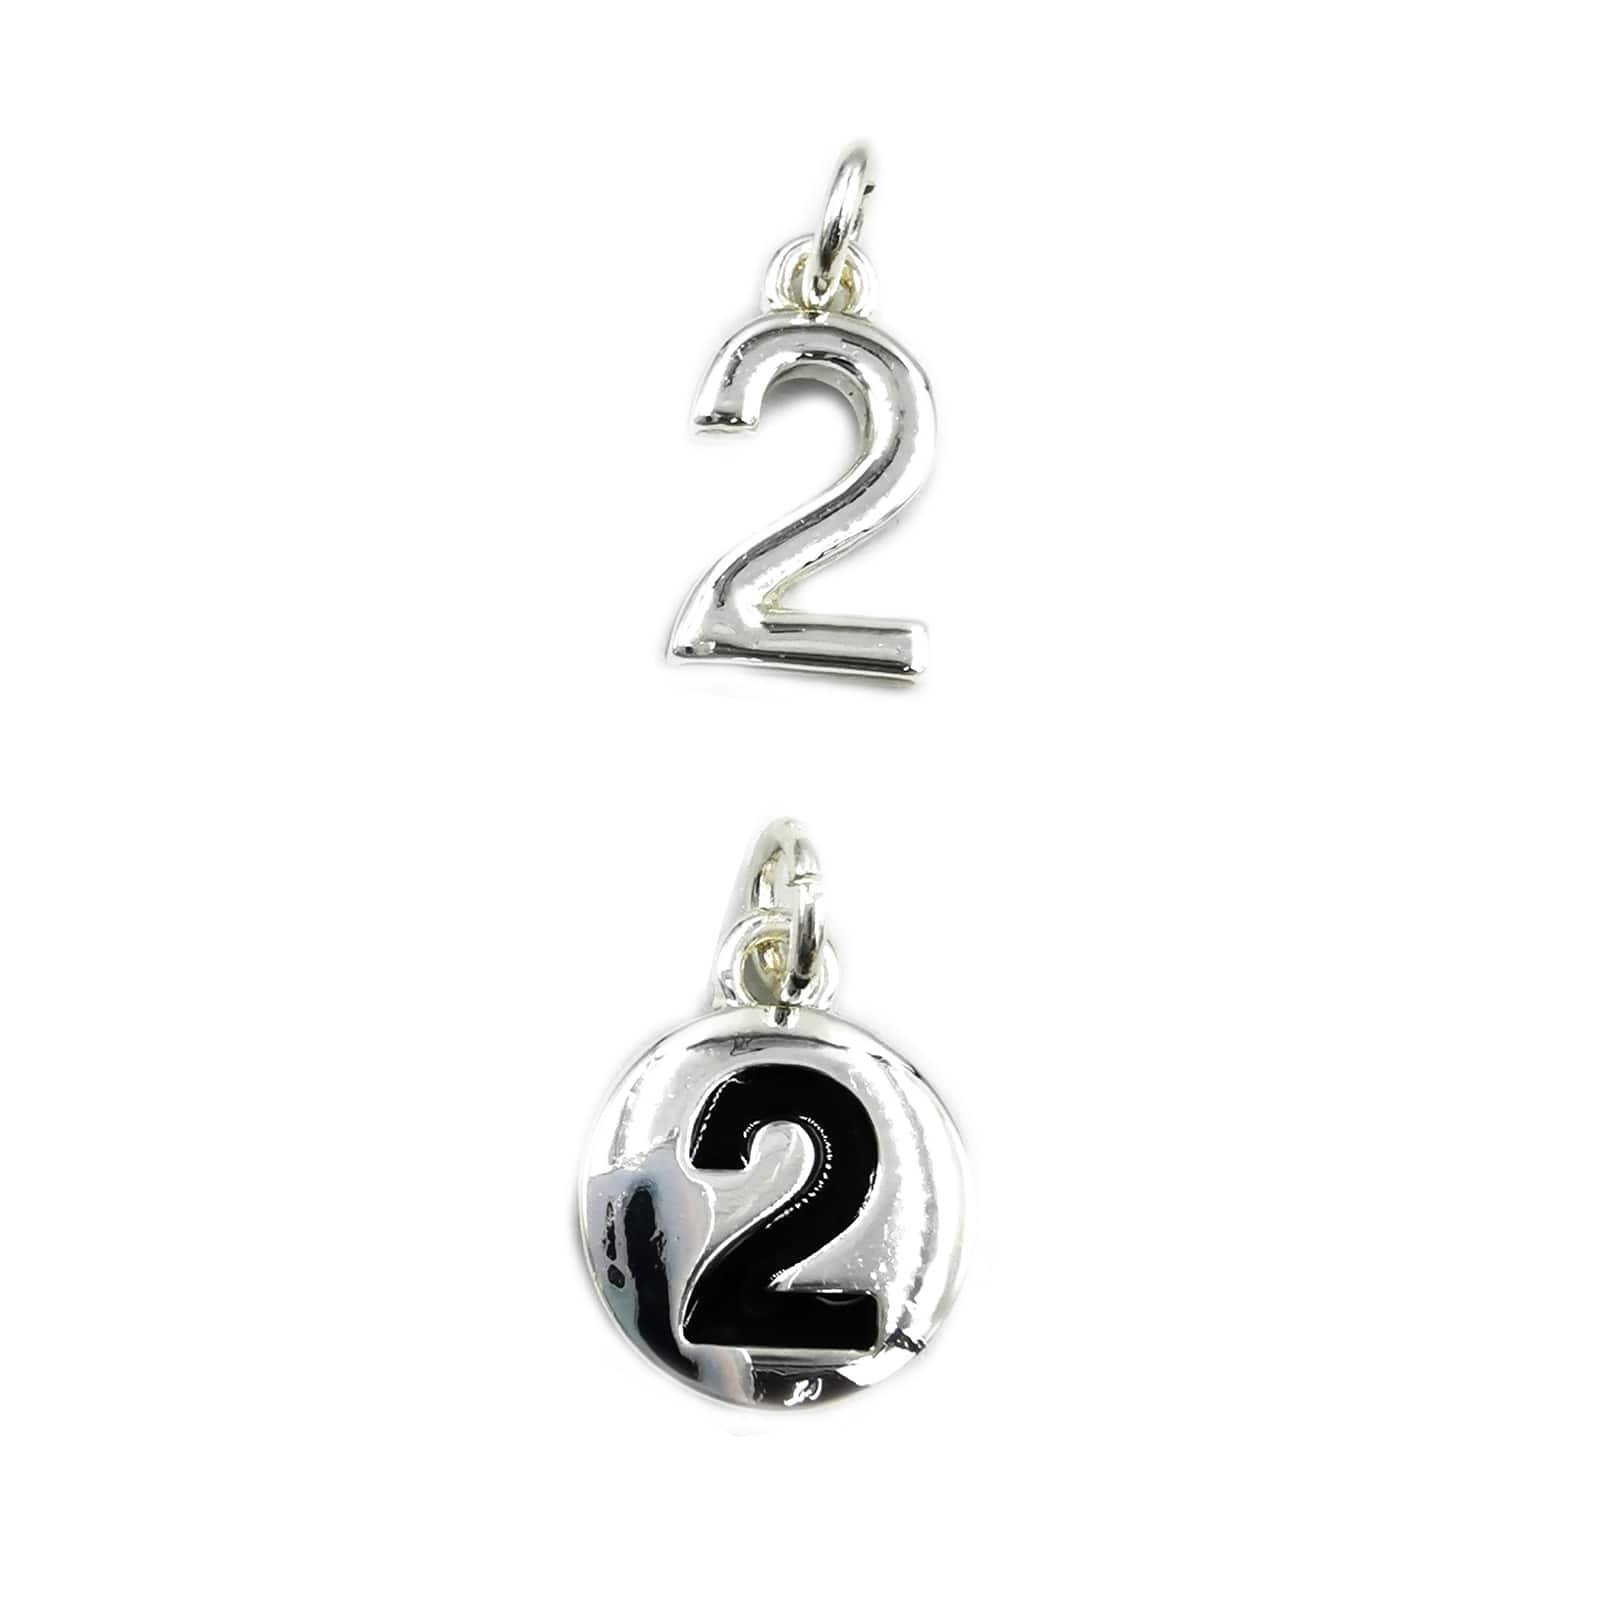 Silver Plated Number Charms by Bead 